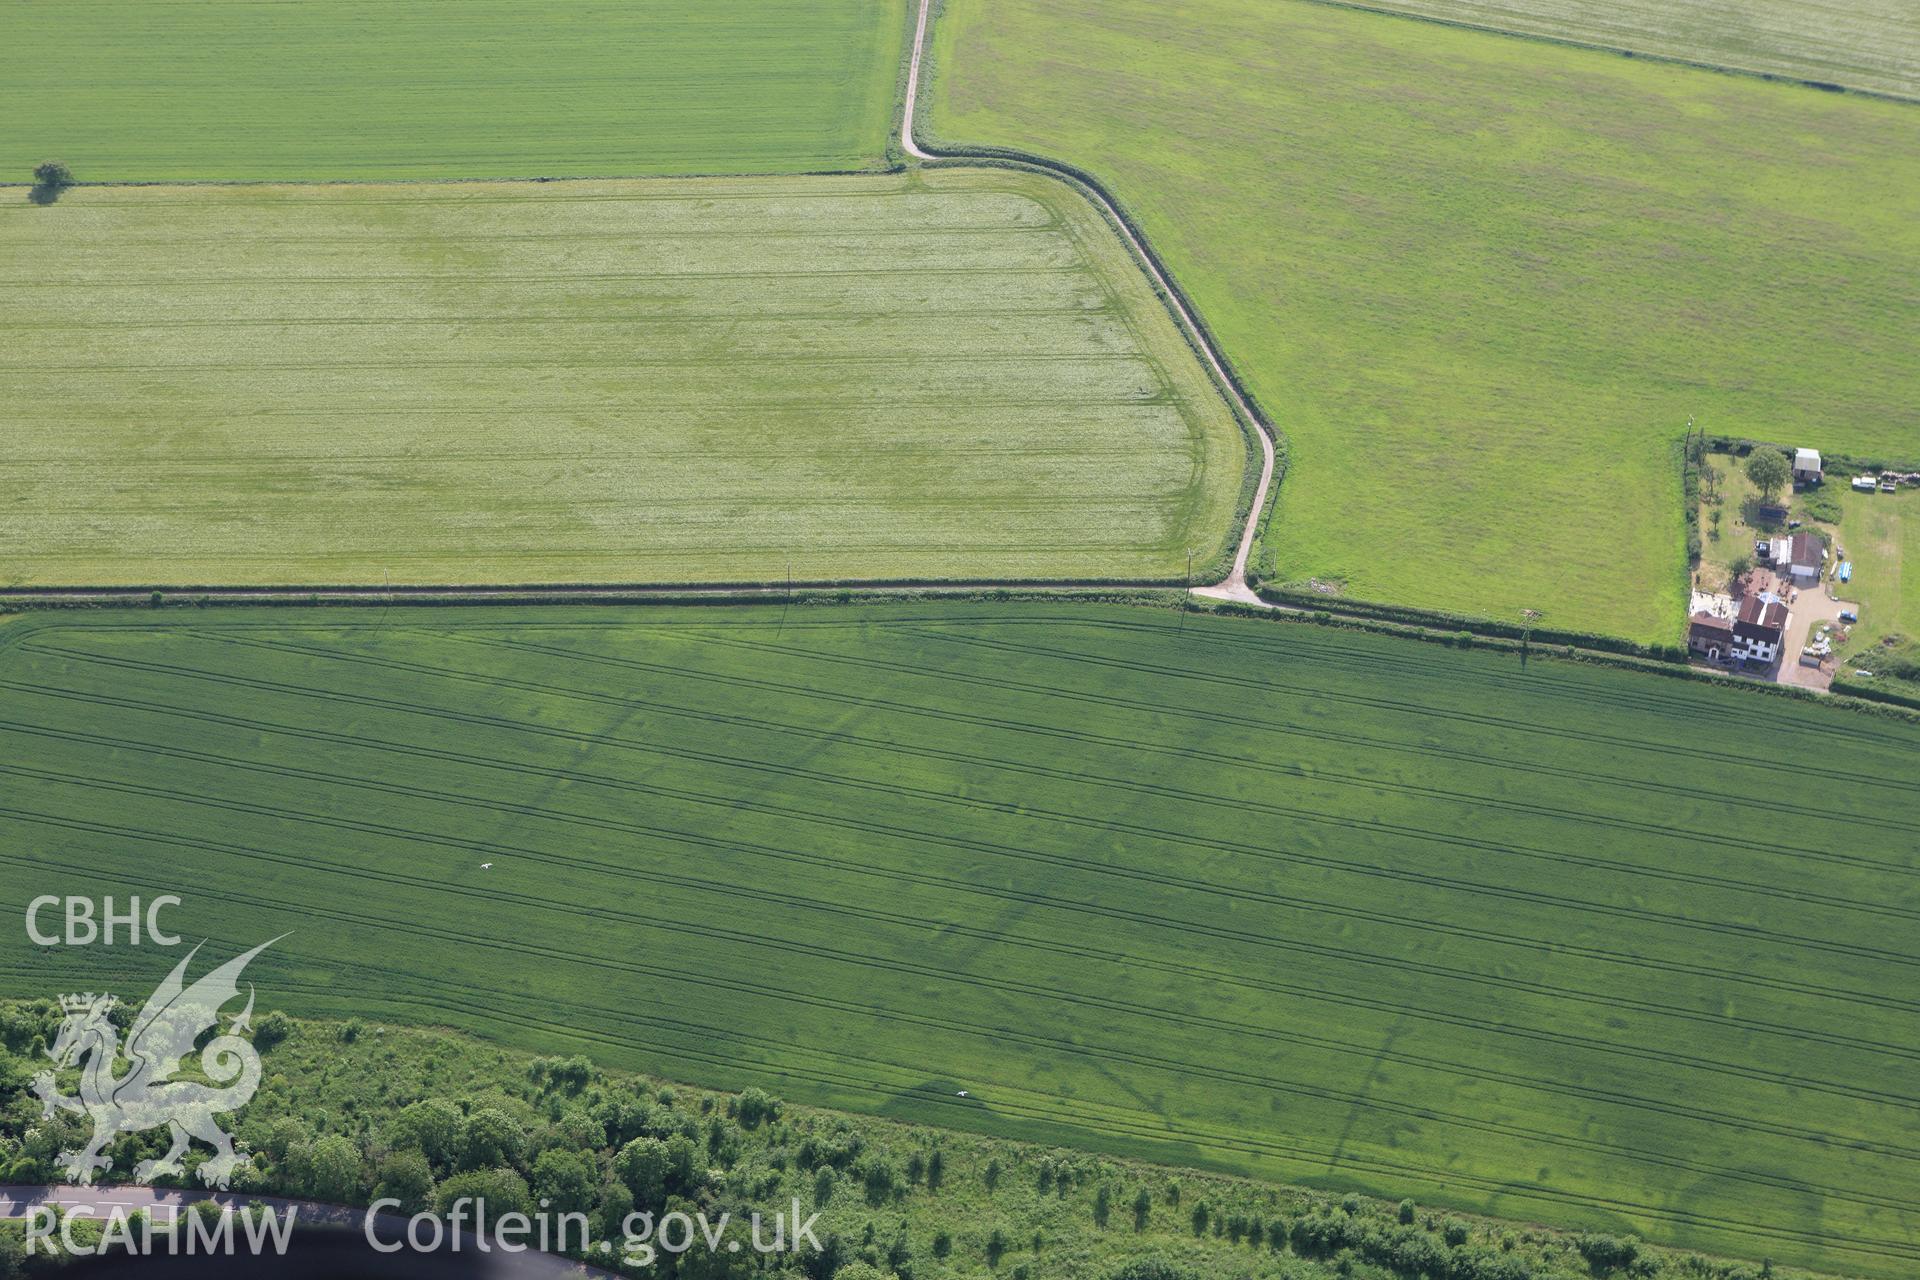 RCAHMW colour oblique aerial photograph of Trewen enclosure complex and ancient field system. Taken on 11 June 2009 by Toby Driver